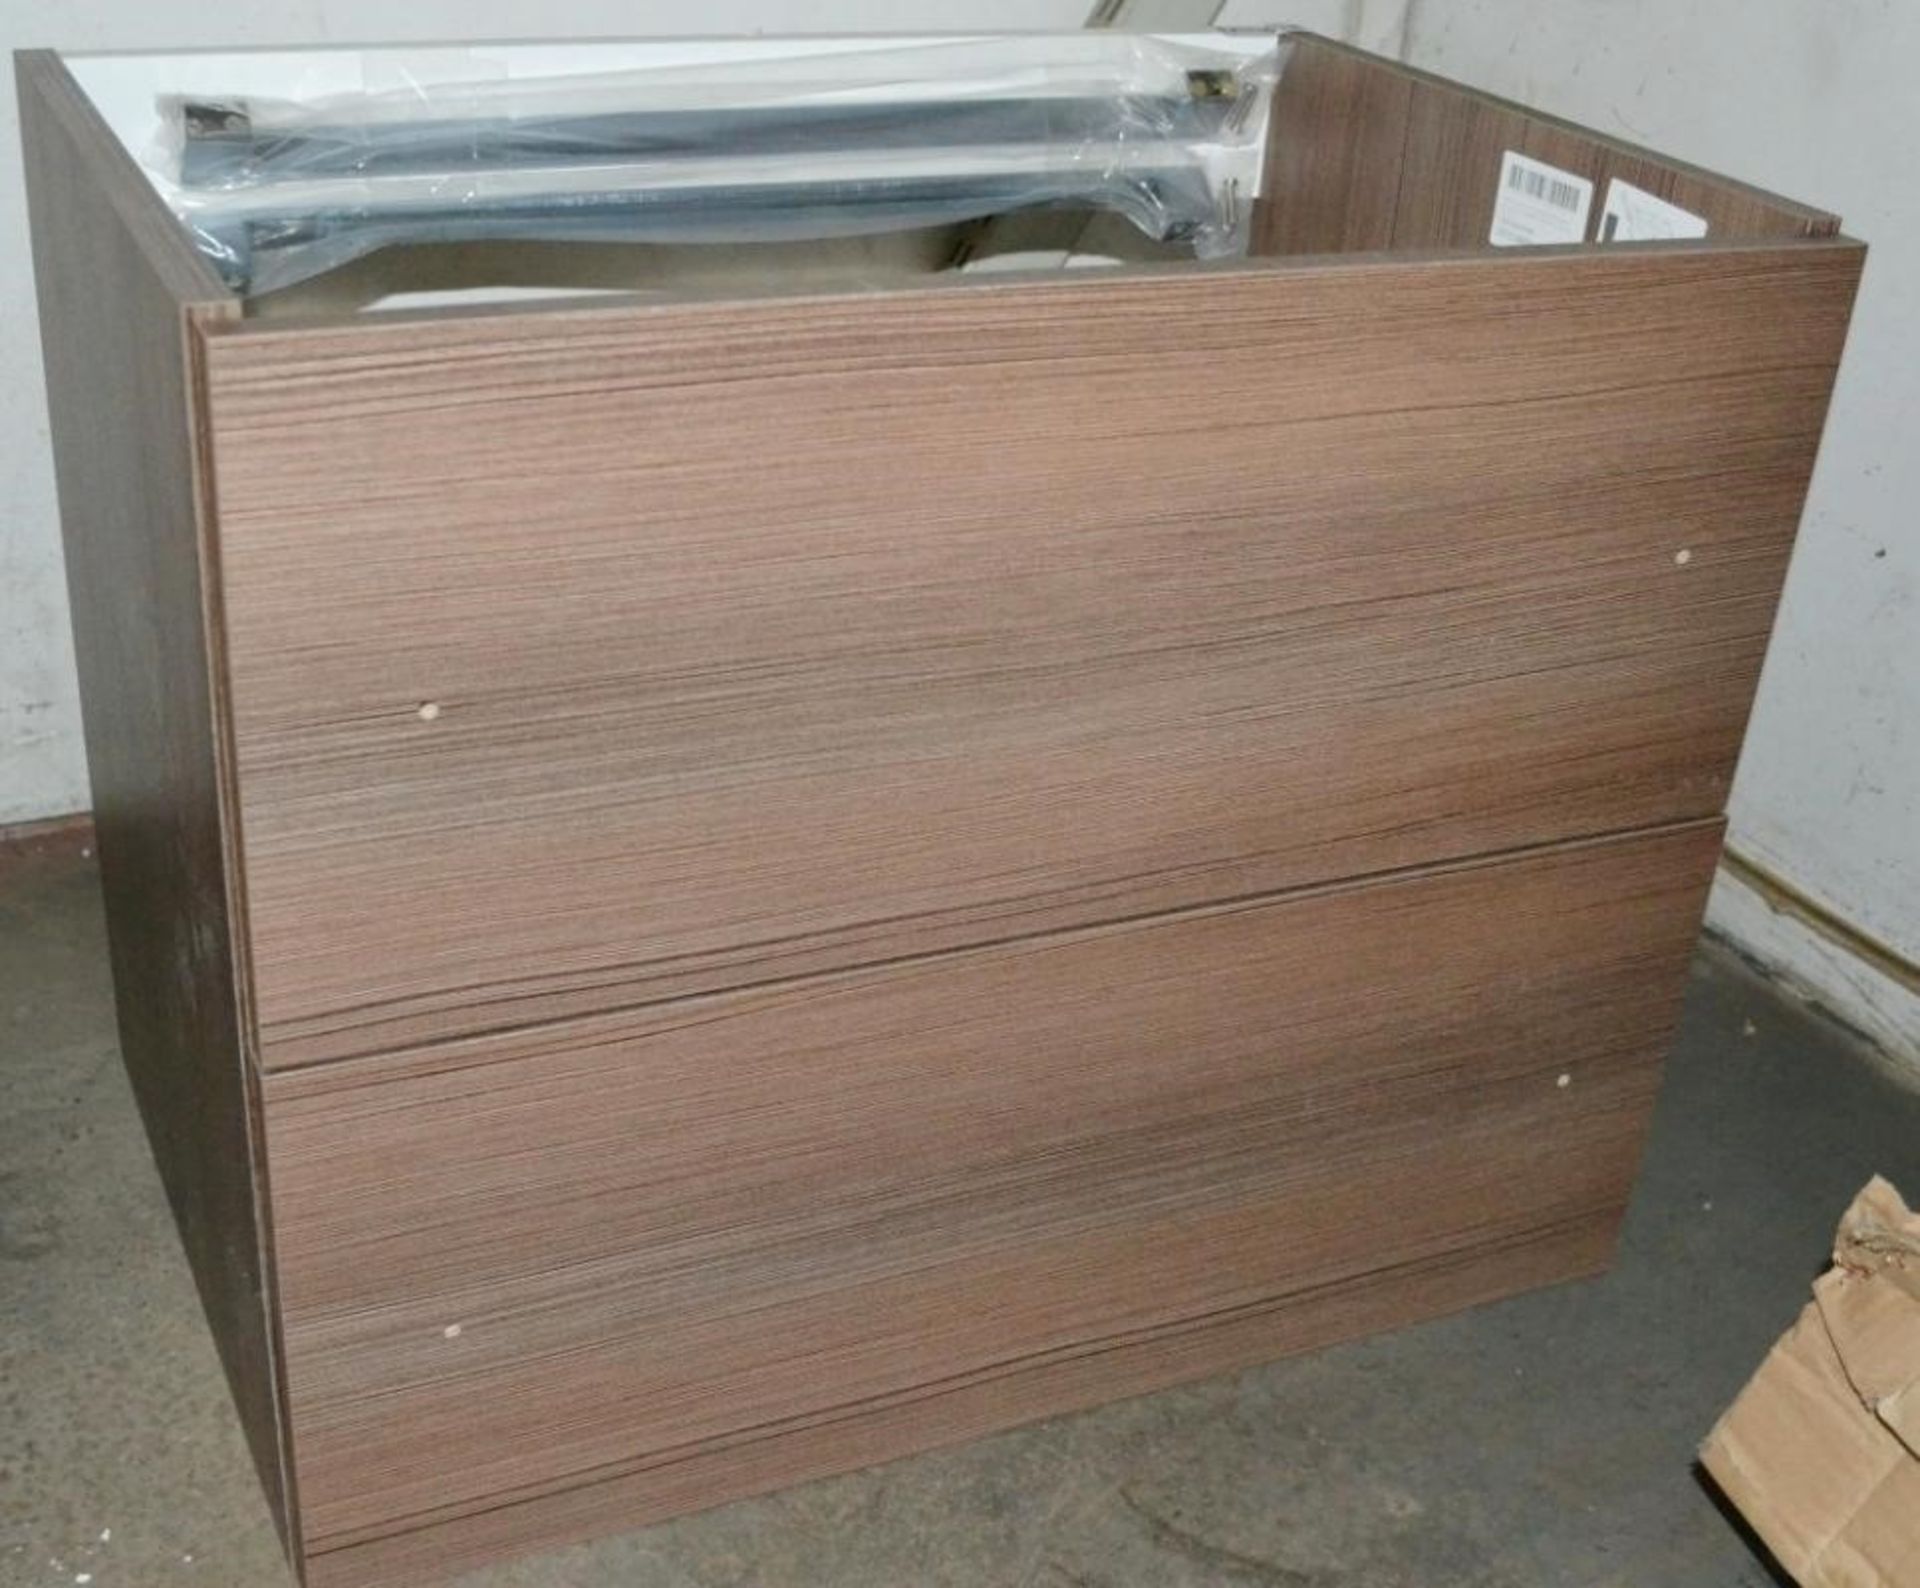 1 x Drift Walnut 600mm Wall Hung Vanity Unit With Chrome Handles - Unboxed Ex-display Item - Dimensi - Image 3 of 4